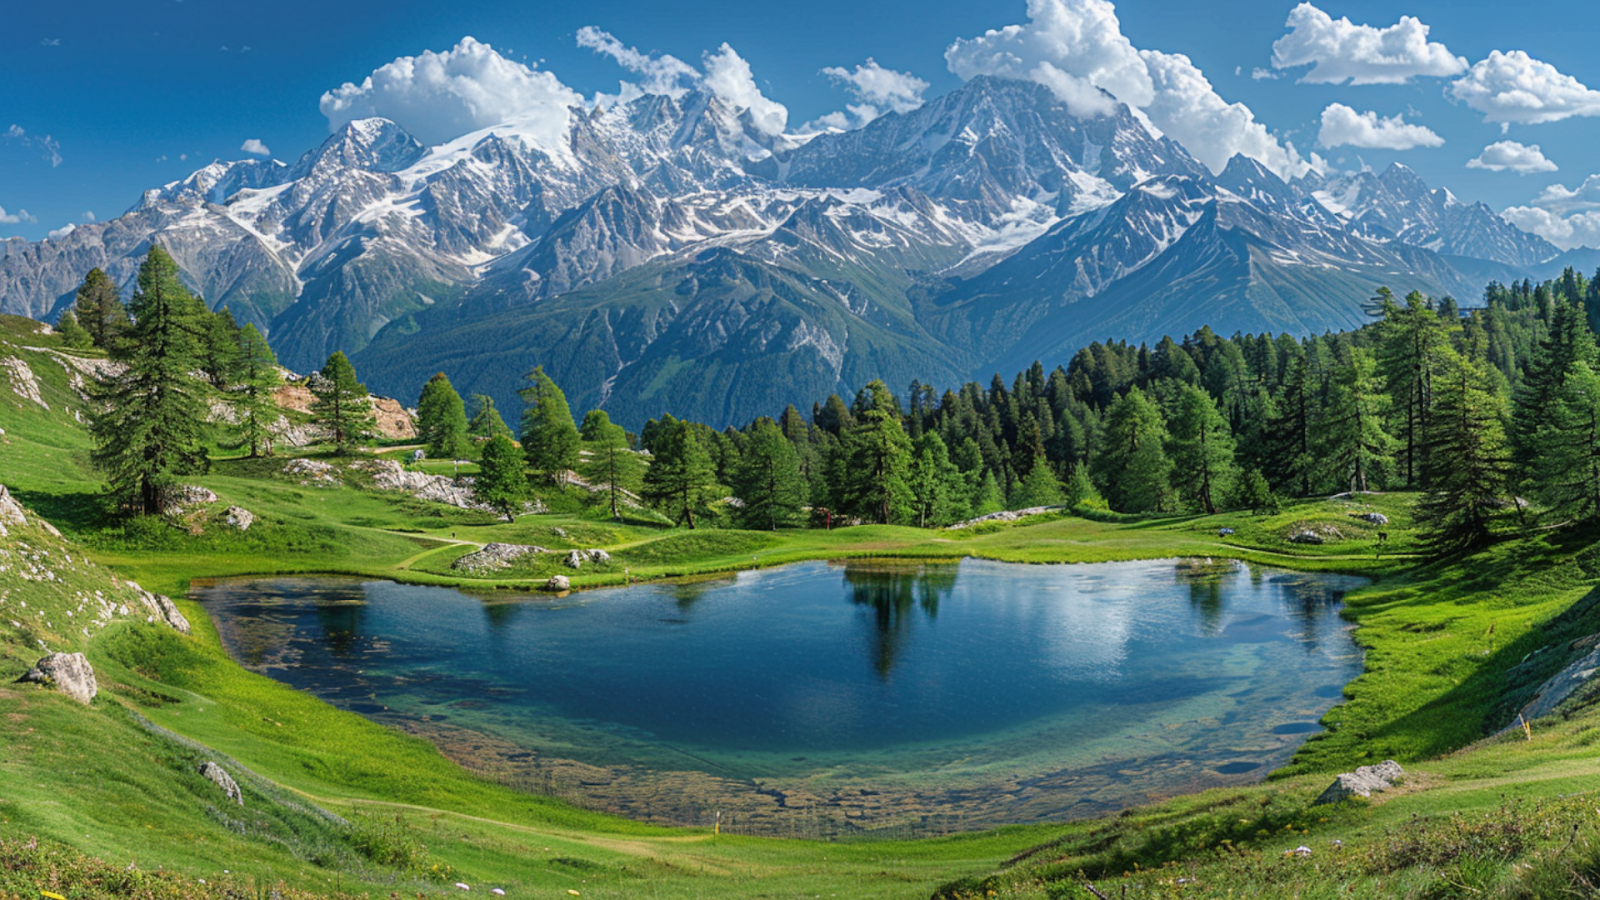 A lake surrounded by lush greens in Courchevel, France